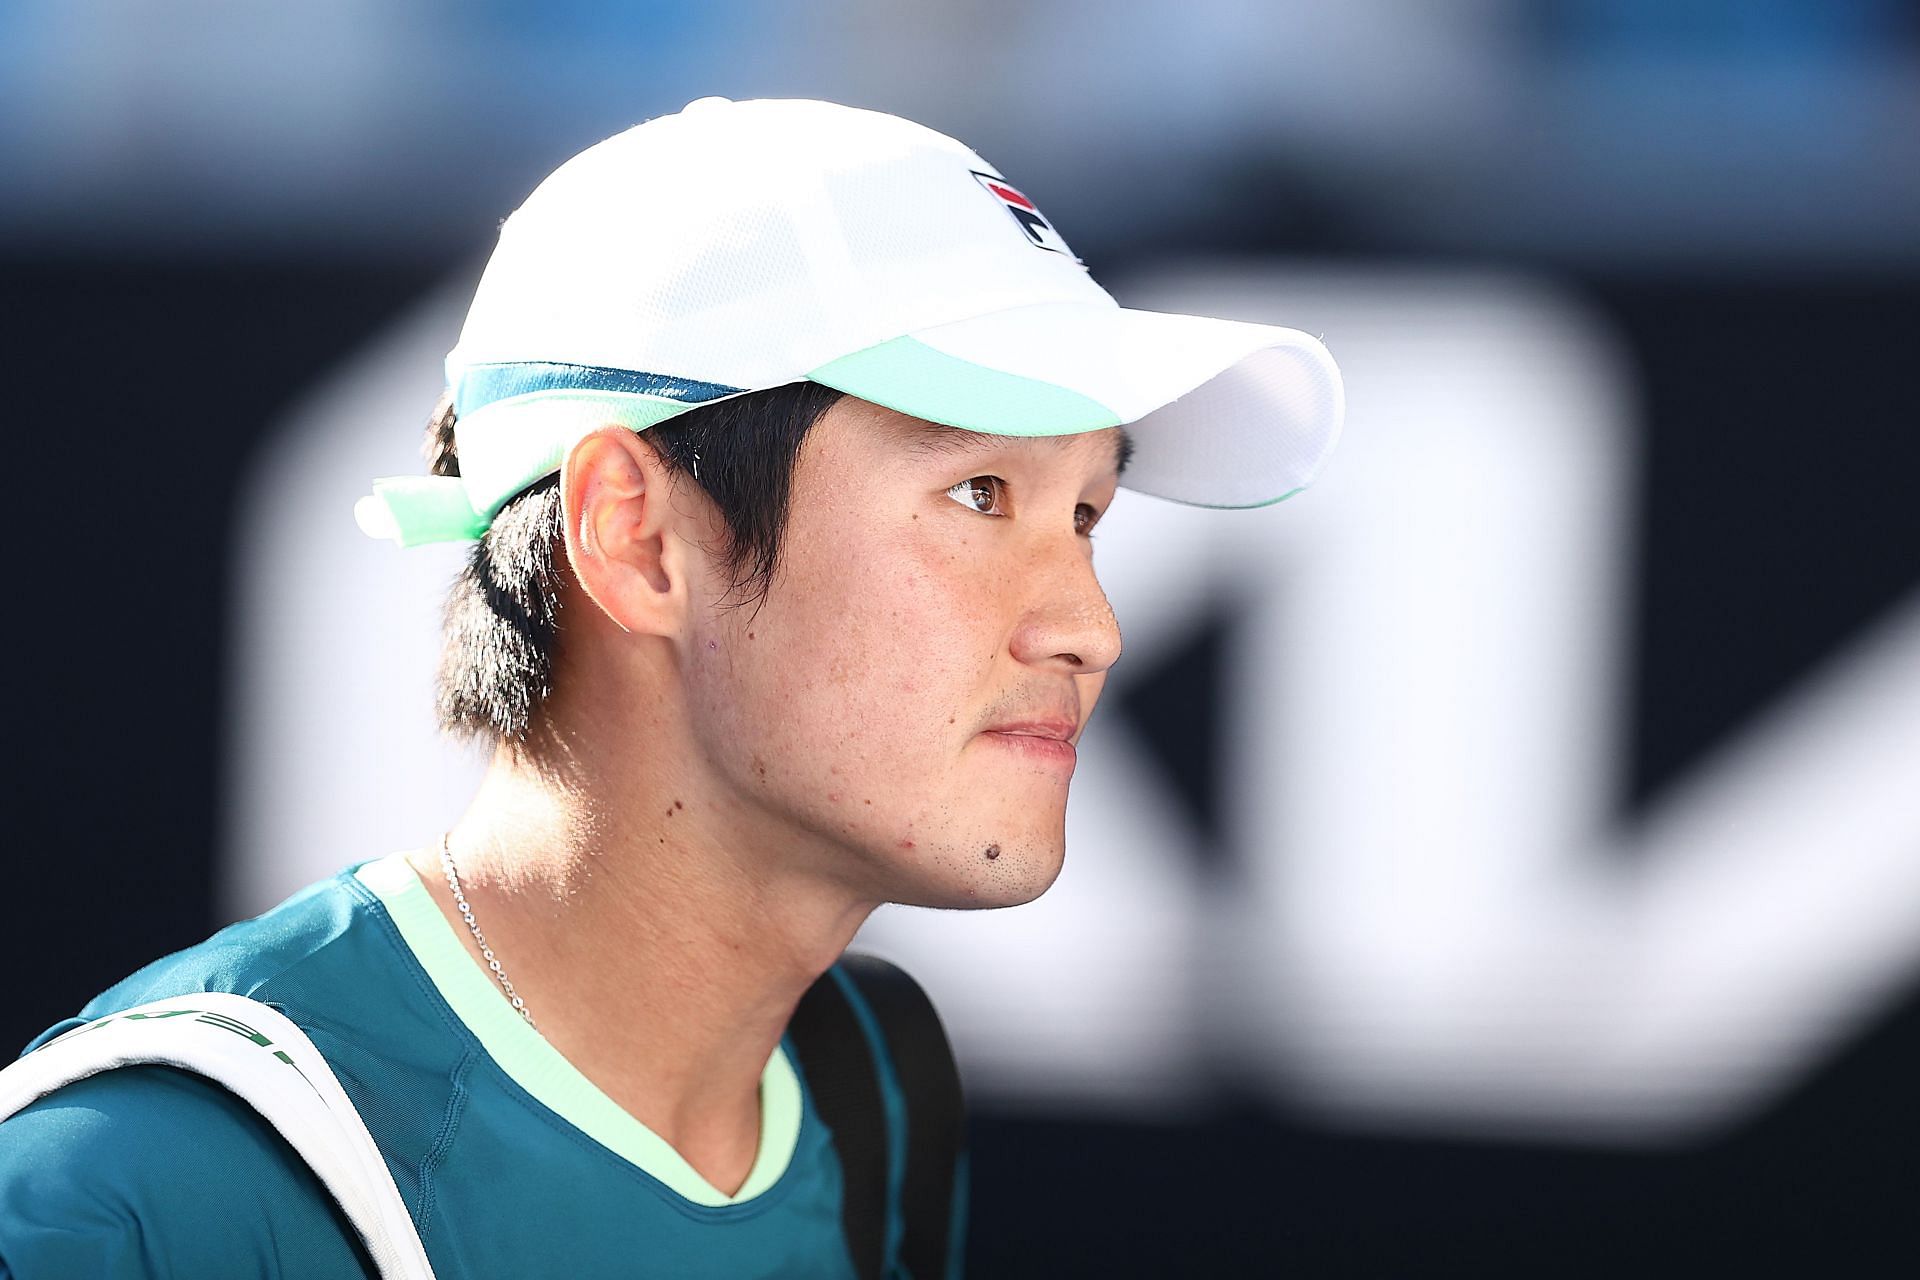 Kwon battled past his opening-round opponent in three sets